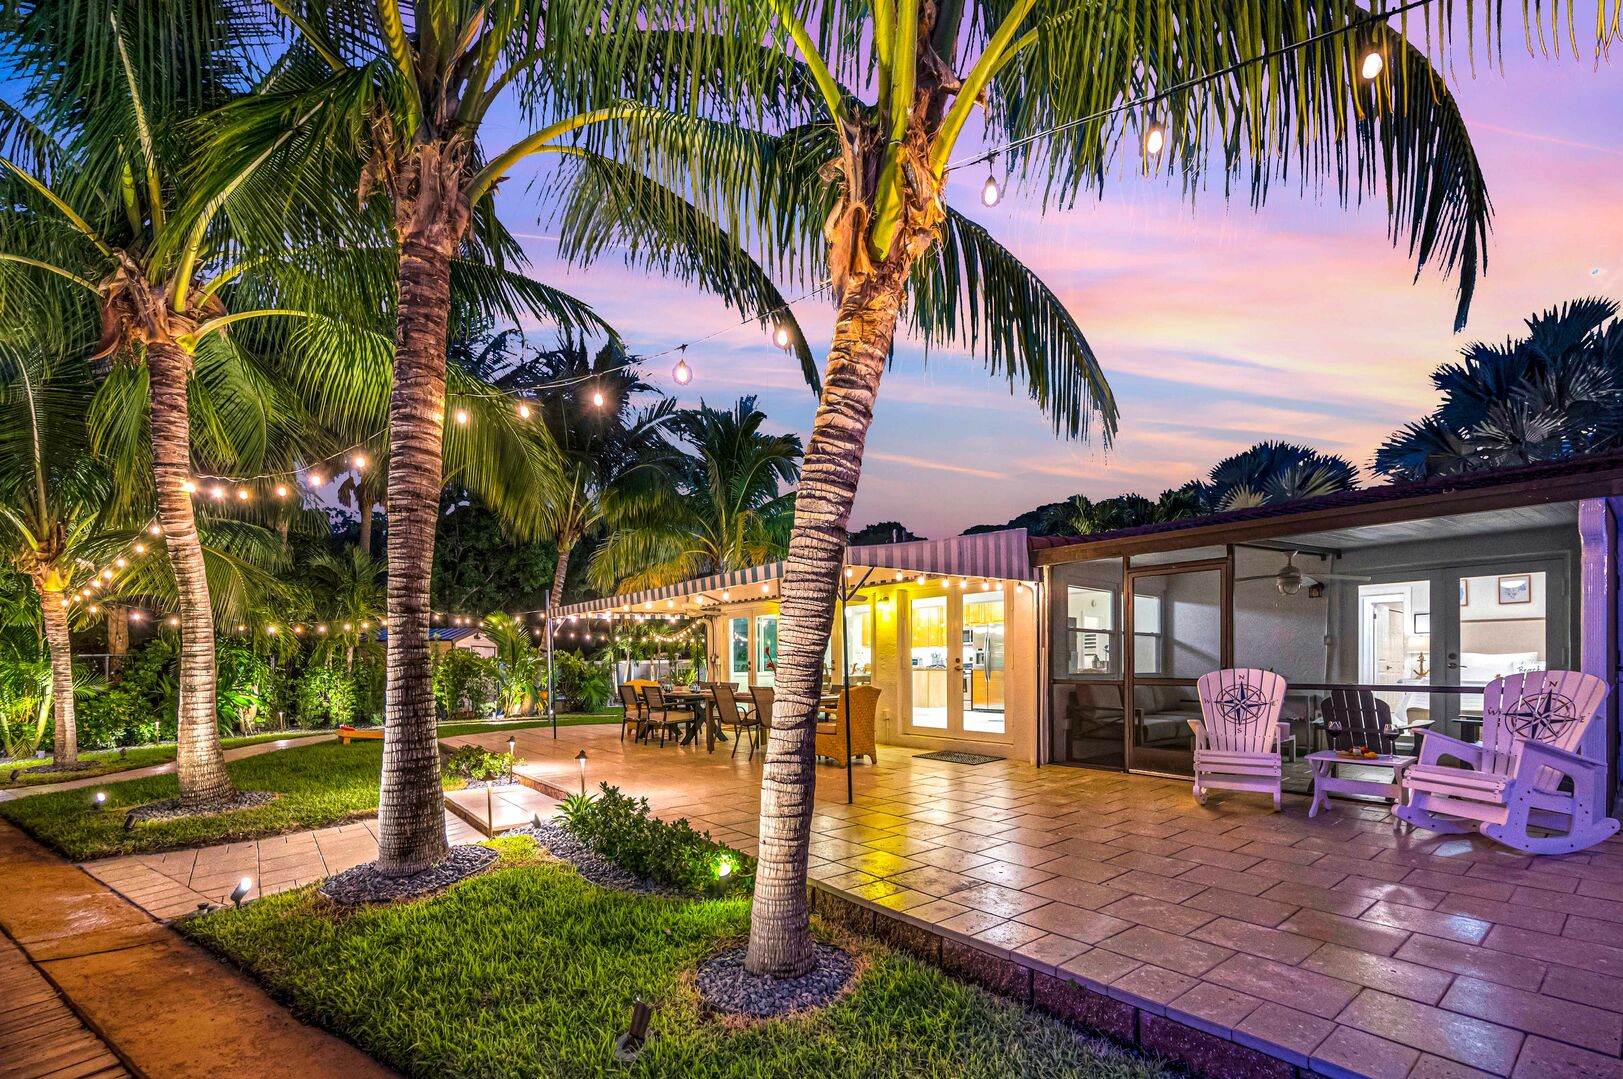 A perfect unwinding spot to enjoy a warm evening looking at the pink Florida sky, spending time in the pool, playing yard games or grilling out.